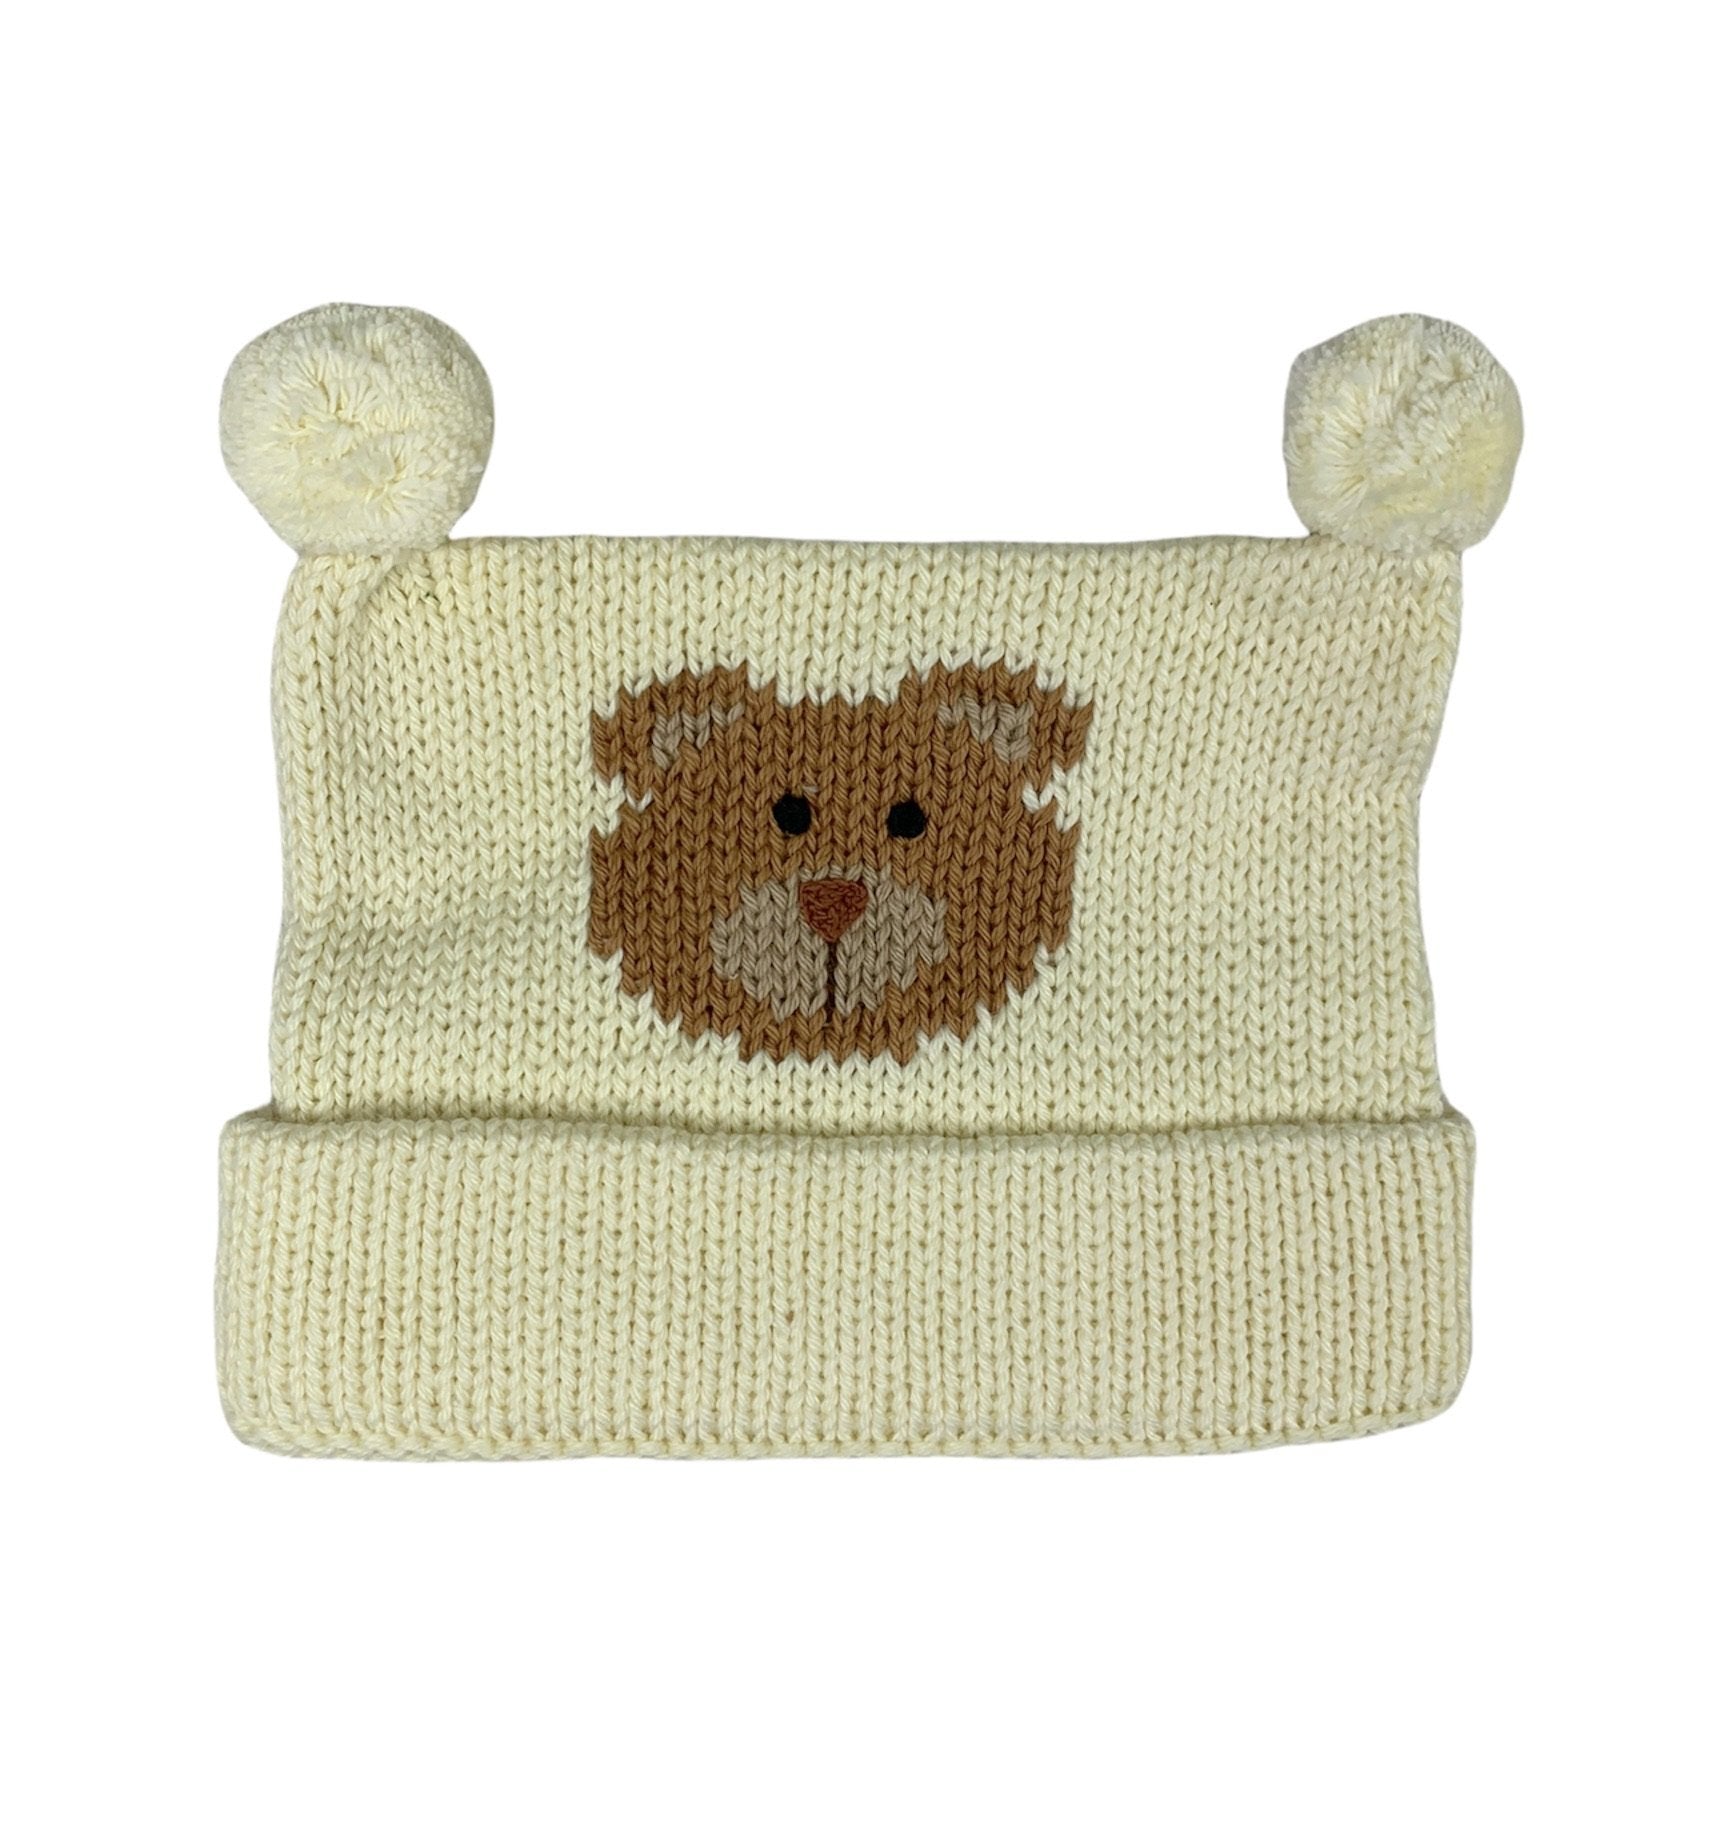 matching hat, ivory with light brown bear face in center and two ivory poms at top, hat is rolled up once at bottom